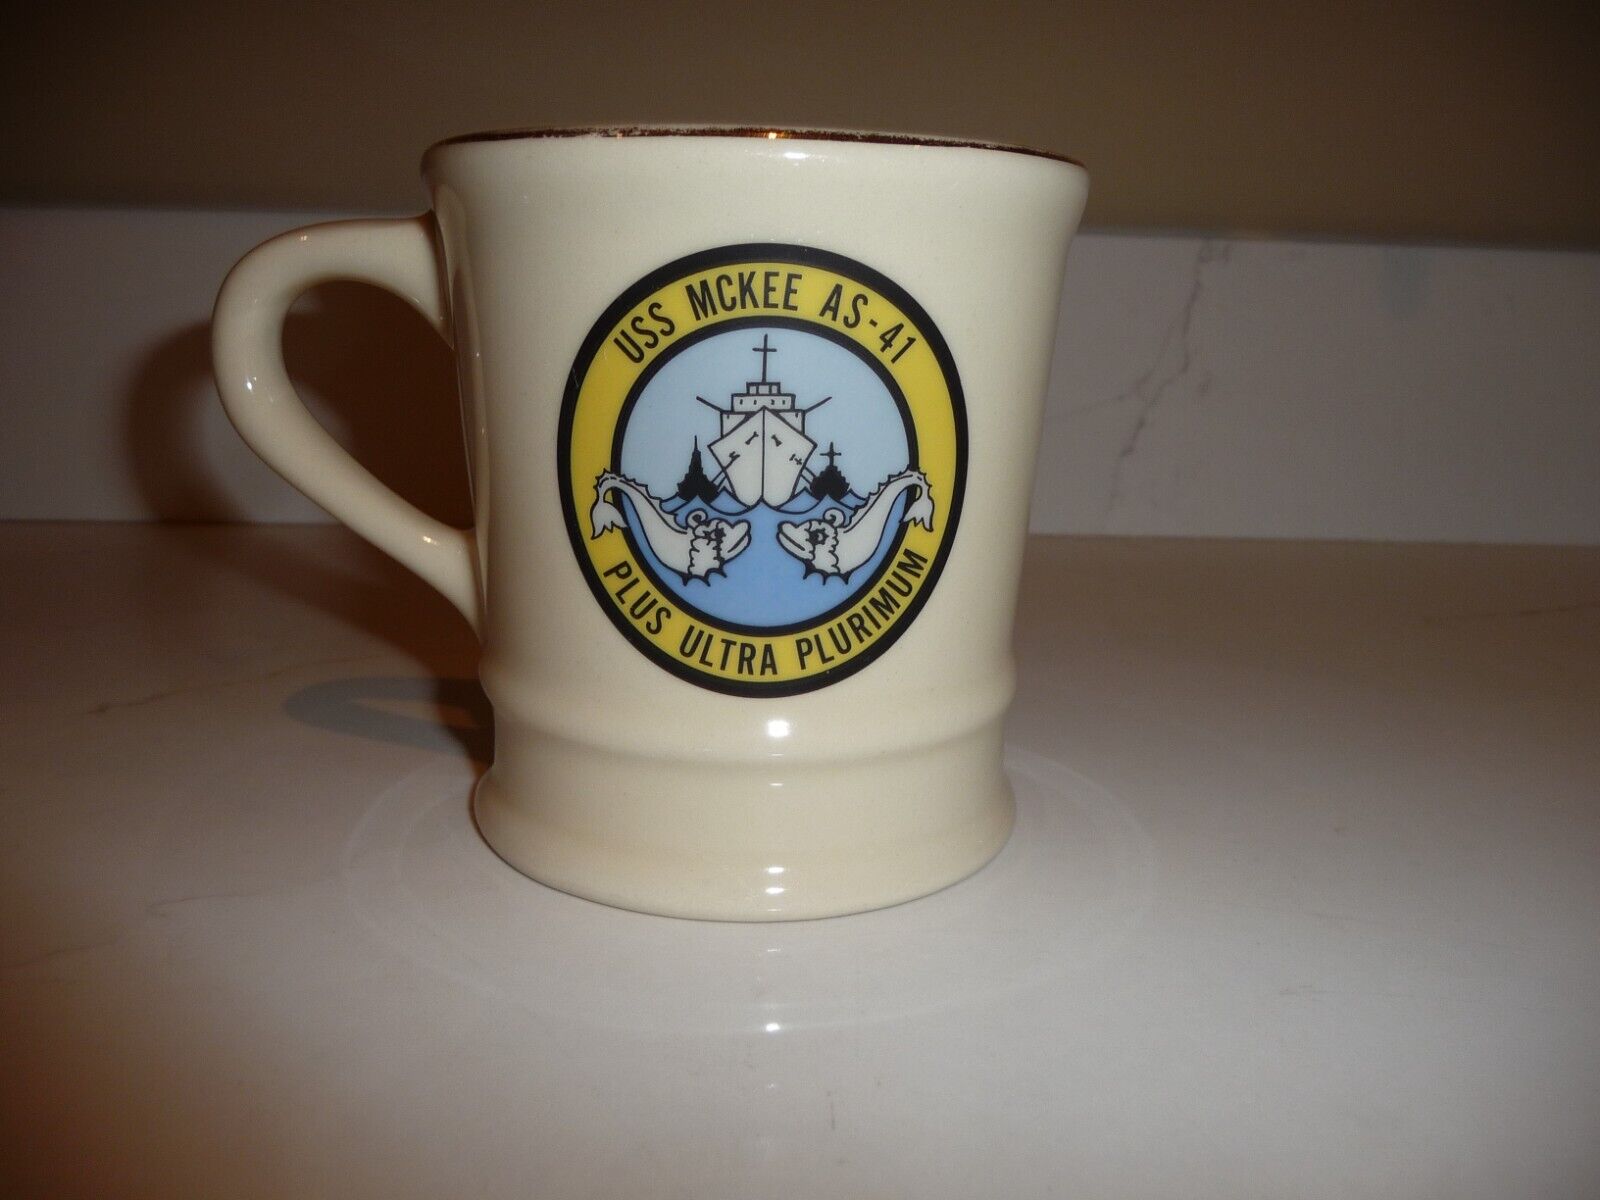 USS MCKEE AS-41 SHIP'S CREST GOLD RIMMED CERAMIC COFFEE/COCOA MUG -Free Shipping